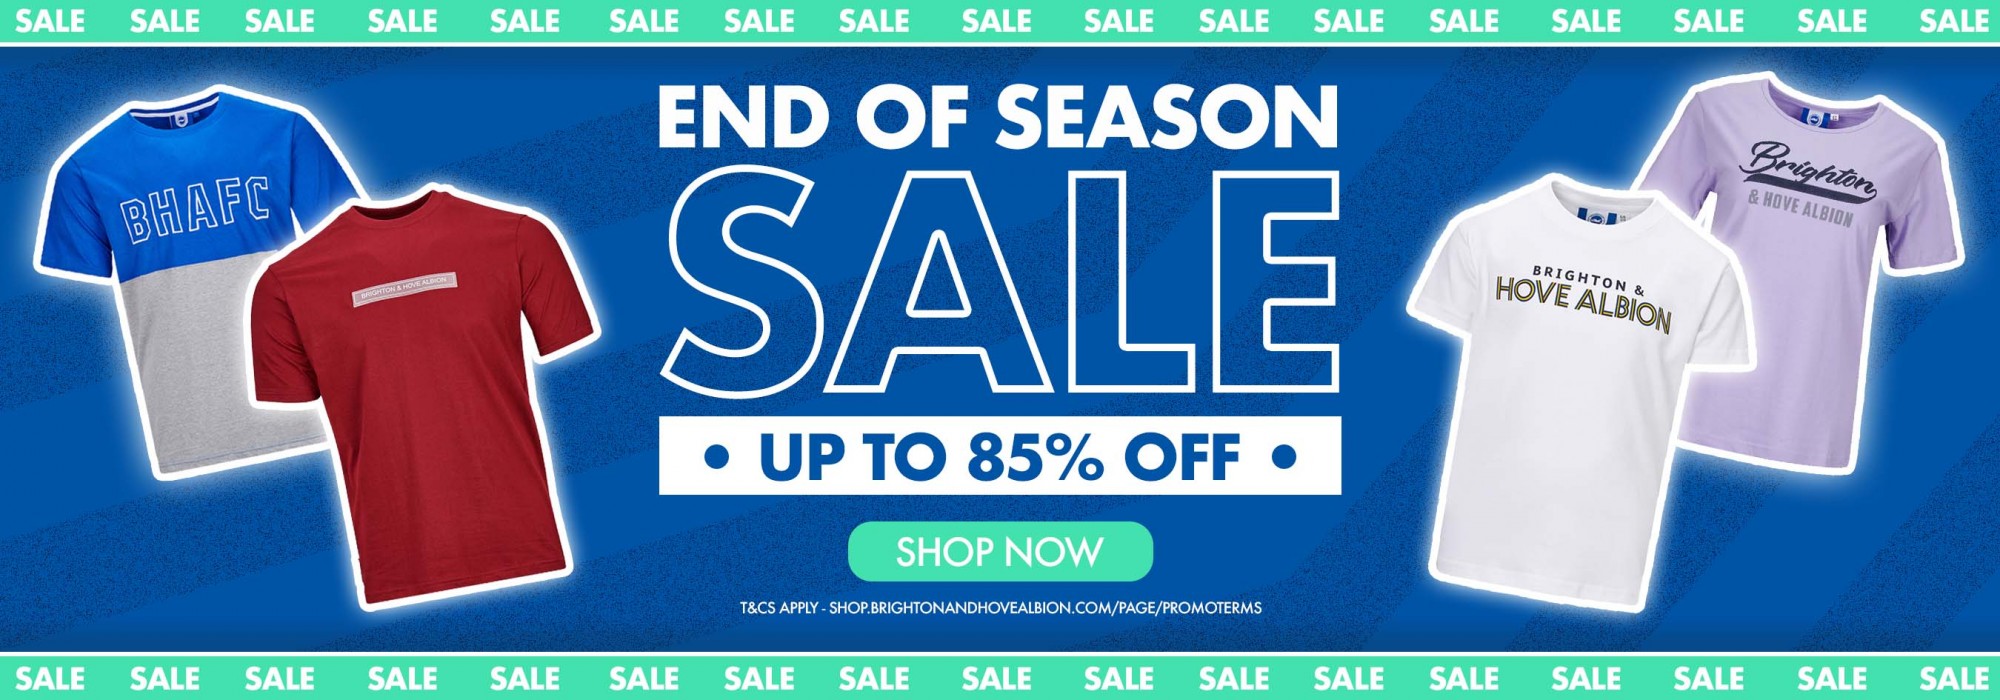 END OF SEASON SALE - UP TO 85% OFF